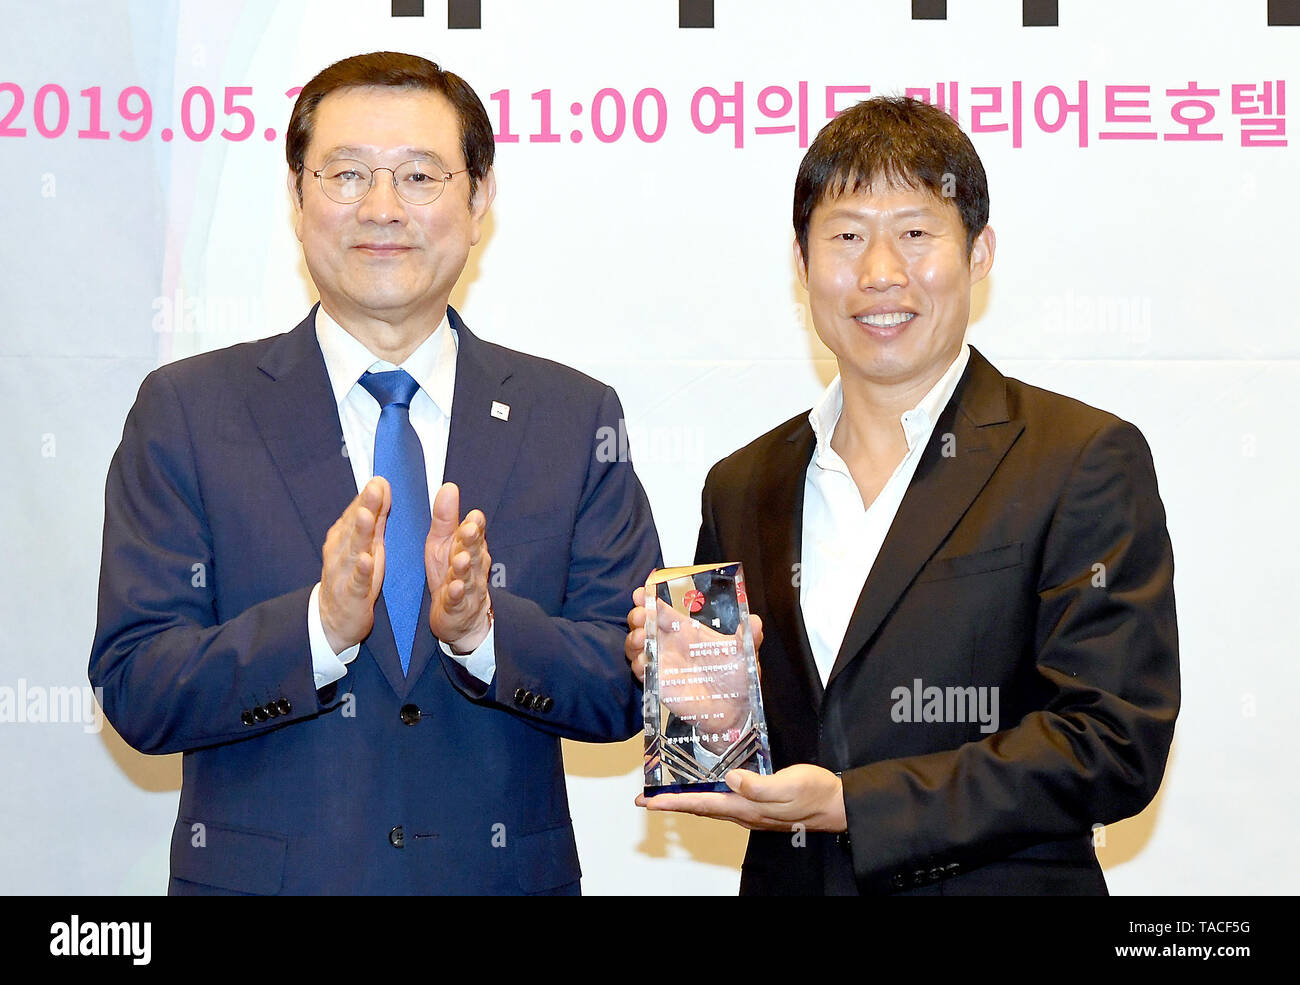 24th May, 2019. Actor Yoo Hae-jin tapped as GDB promotional envoy Actor Yoo Hae-jin (R) poses for a photo with Gwangju Mayor Lee Yong-sup after being appointed as a promotional ambassador for the 2019 Gwangju Design Biennale (GDB) at a Seoul hotel on May 24, 2019. The event will take place from Sept. 7-Oct. 31 in Gwangju, 329 km south of Seoul. Credit: Yonhap/Newcom/Alamy Live News Stock Photo